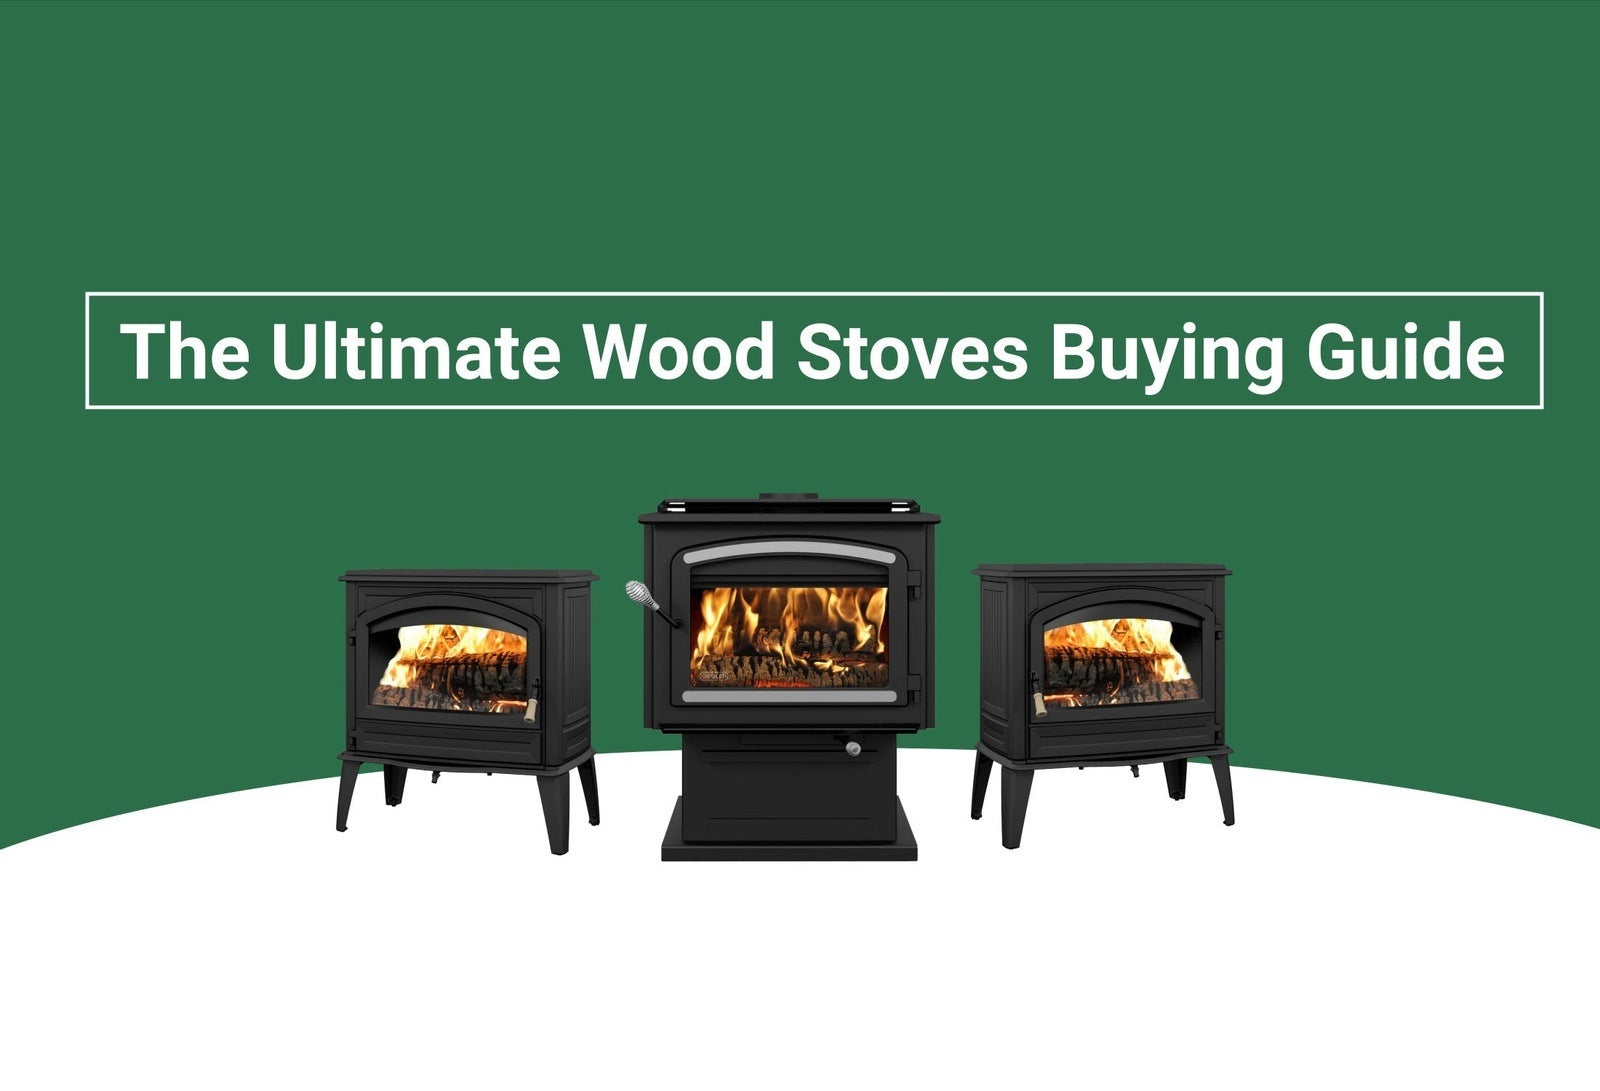 The Ultimate Wood Stoves Buying Guide